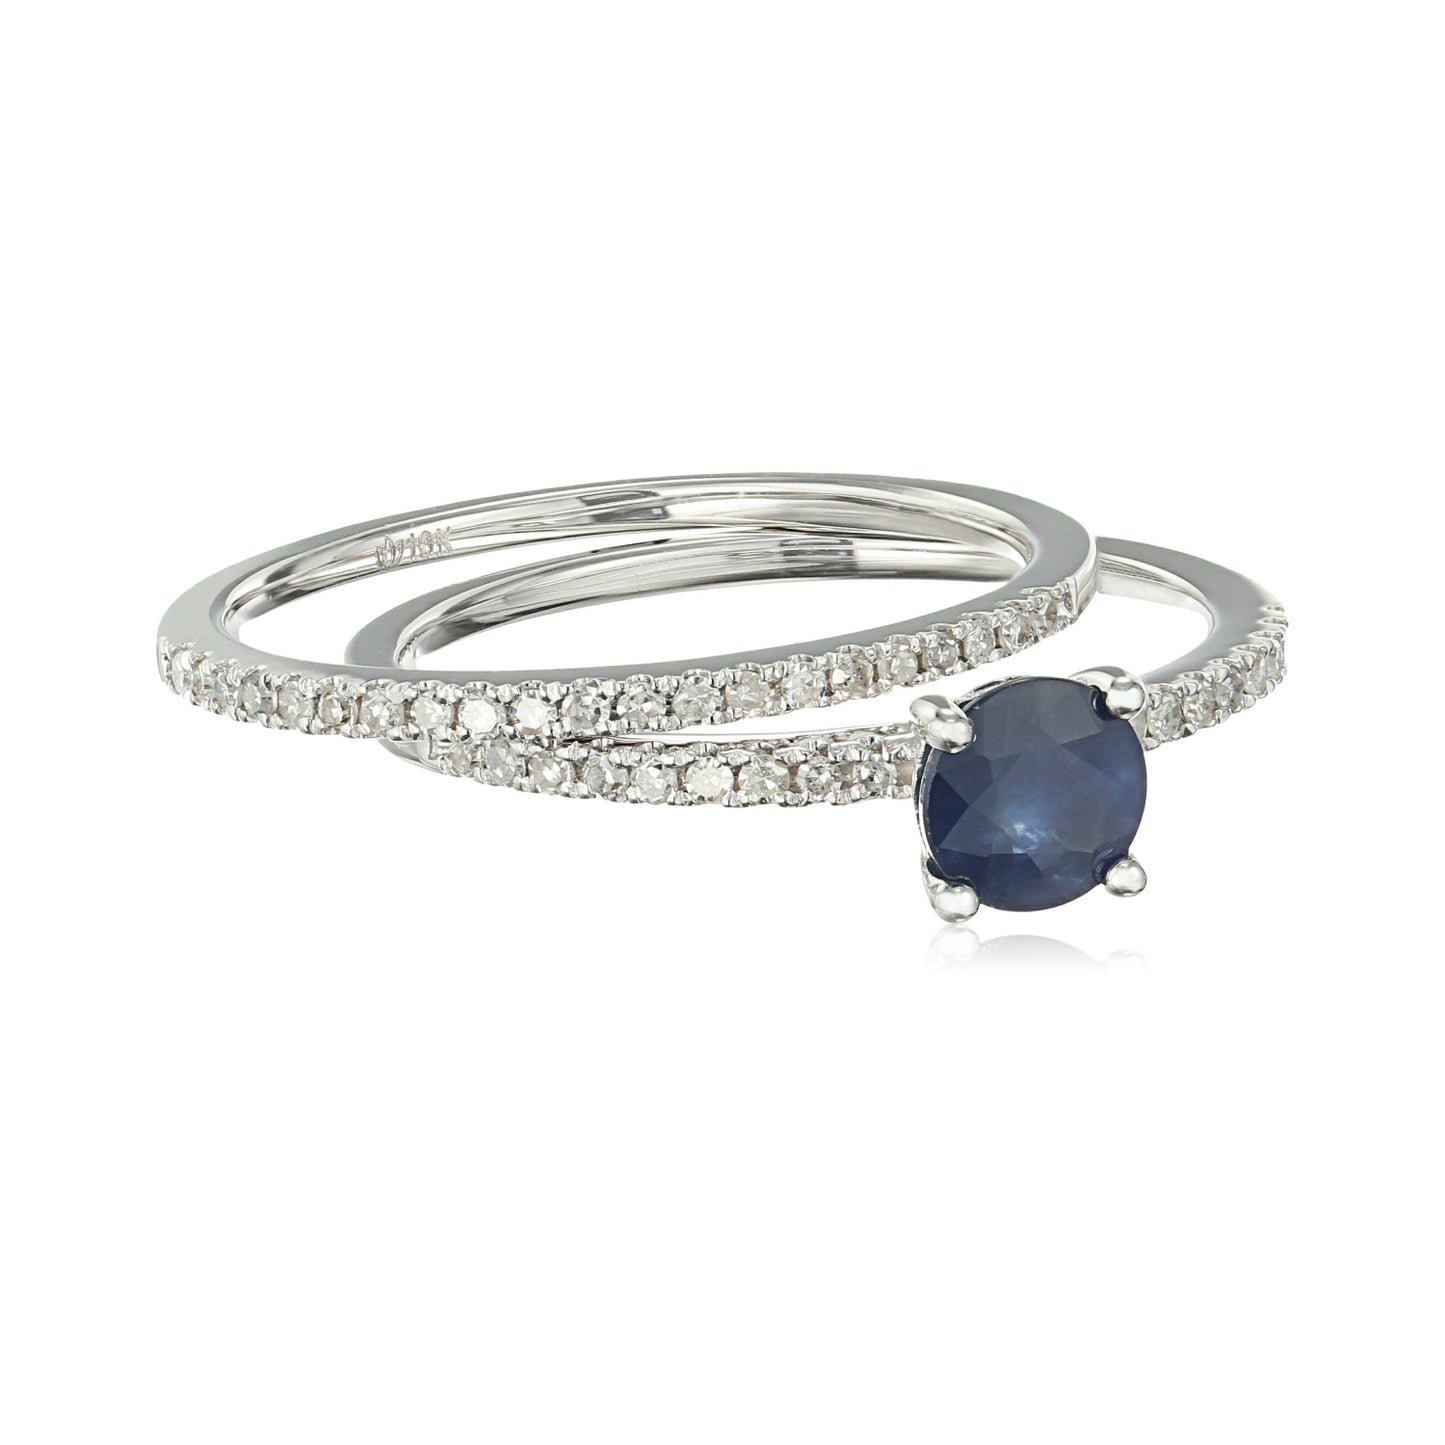 10k White Gold Genuine Blue Sapphire And Diamond Stackable Ring (1/5cttw, H-I Color, I1-I2 Clarity), - pinctore